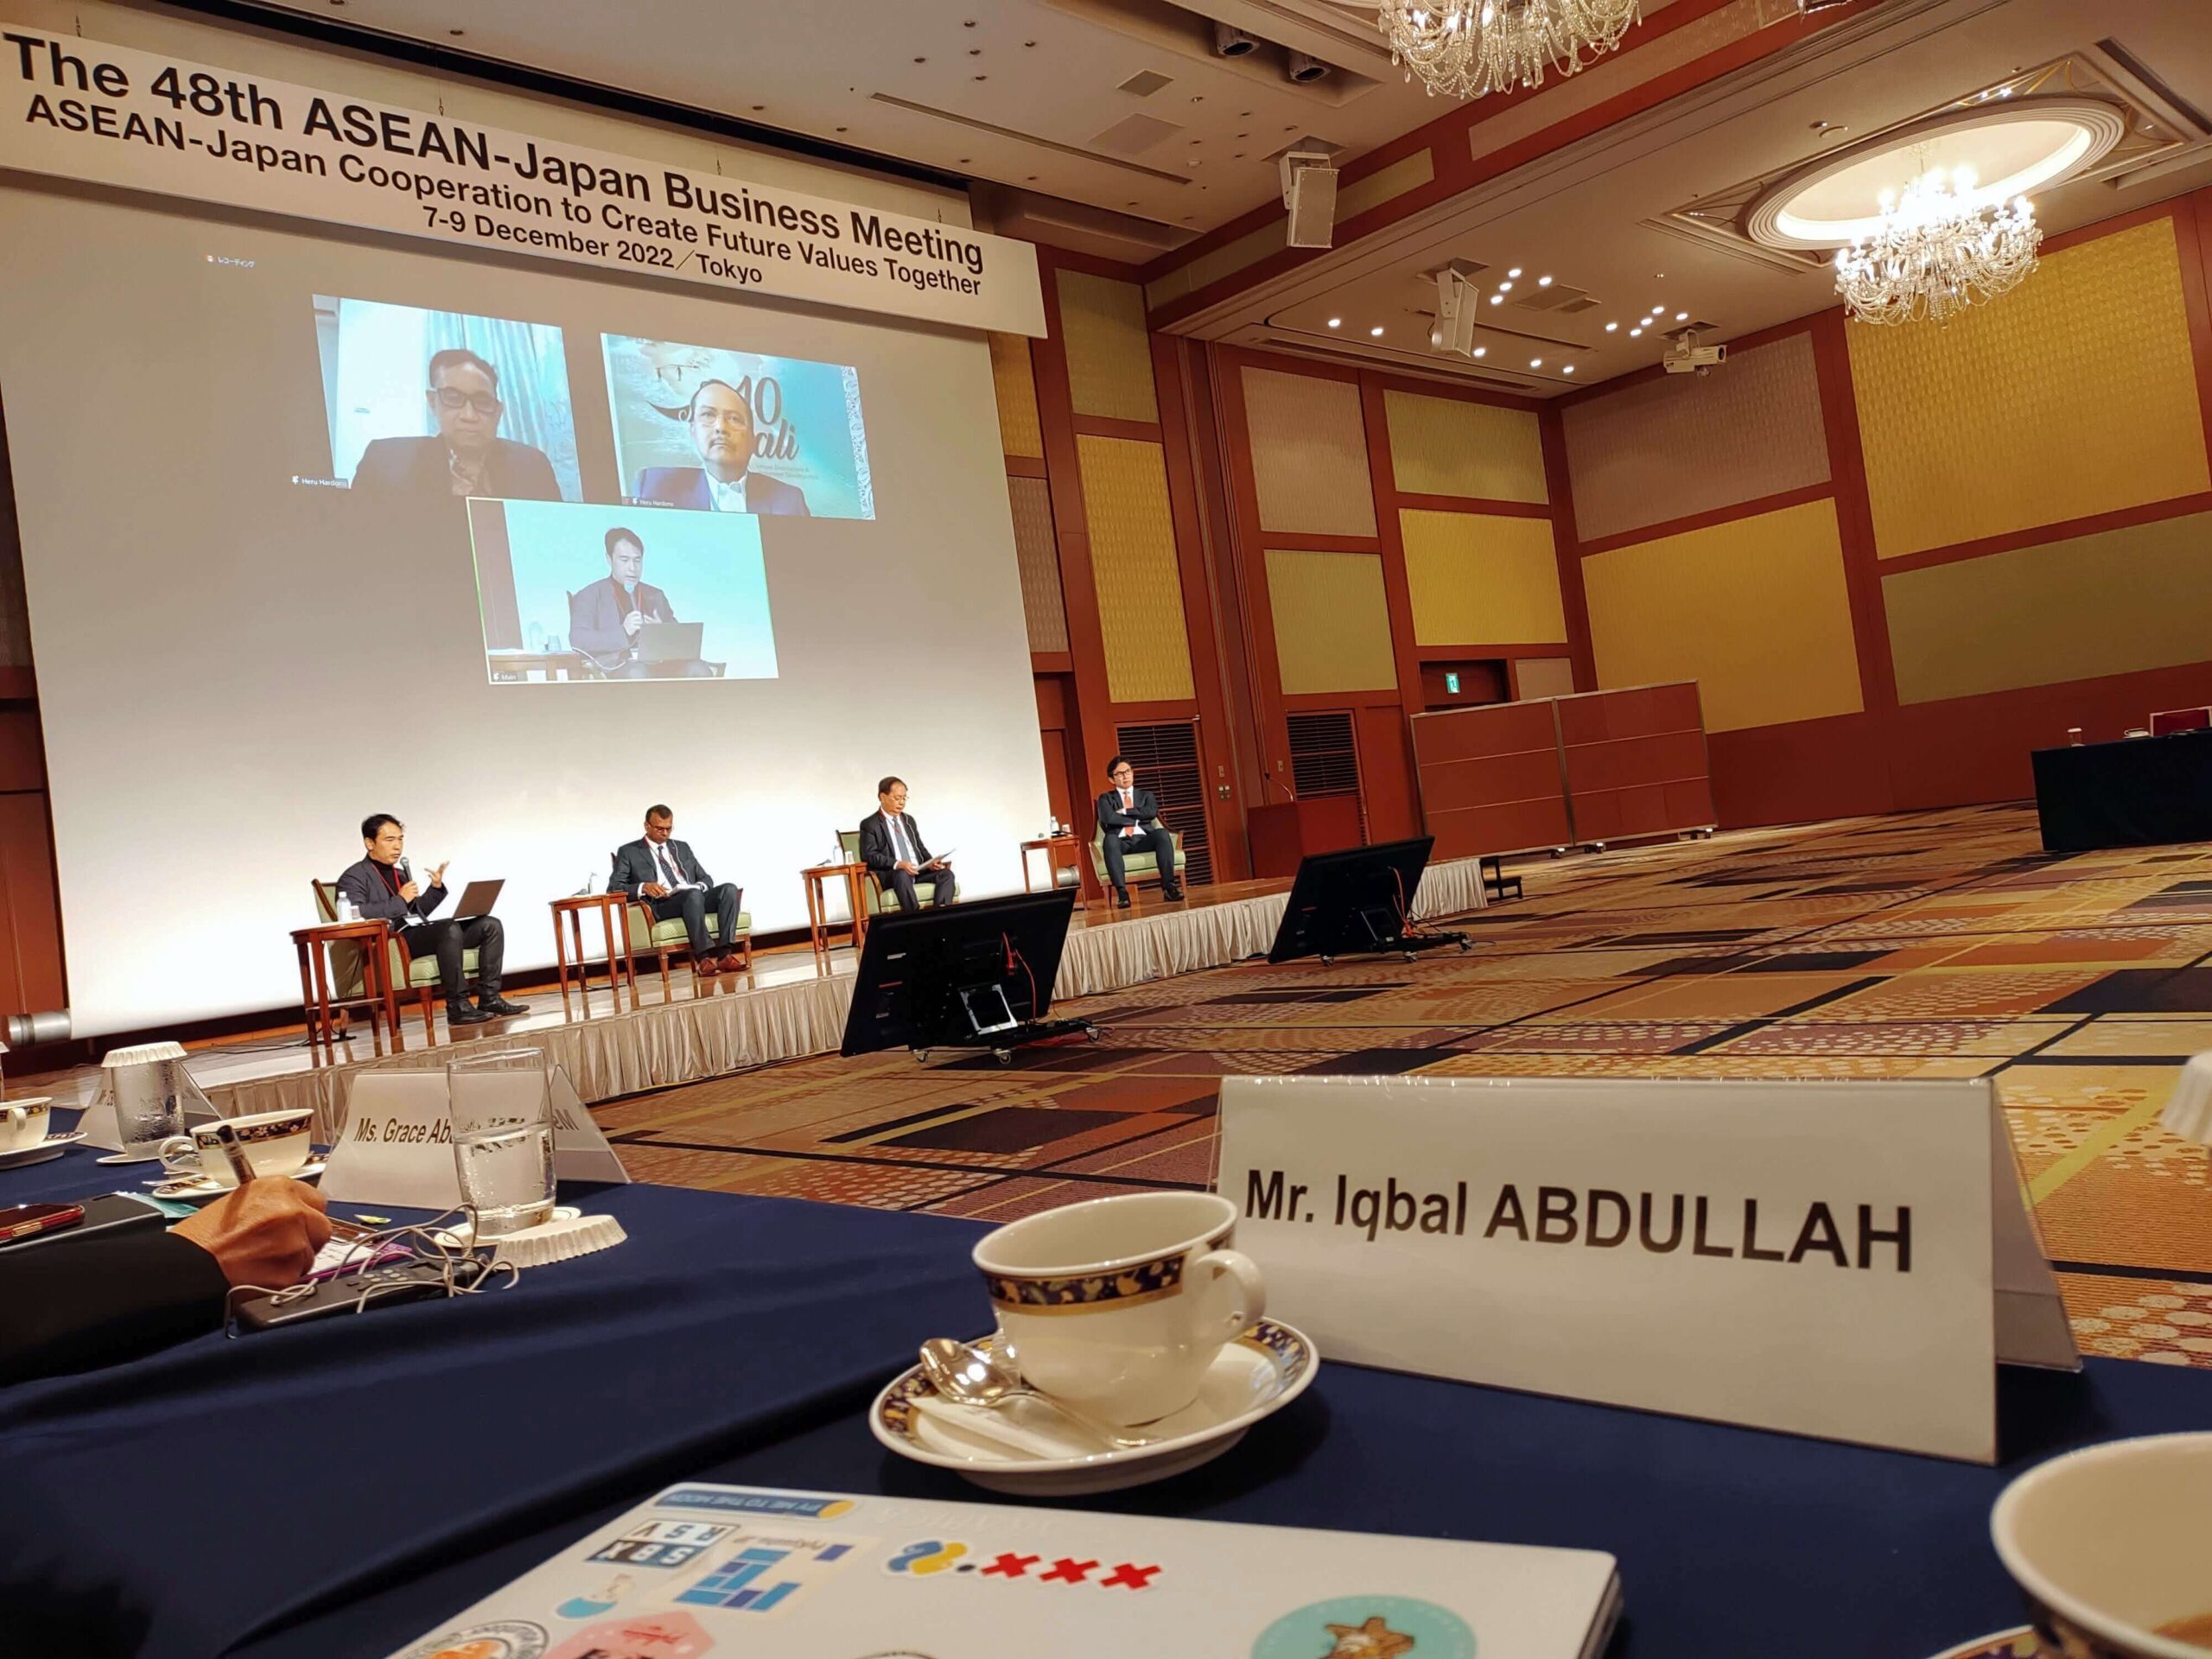 The first panel discussion during the 48th AJBM